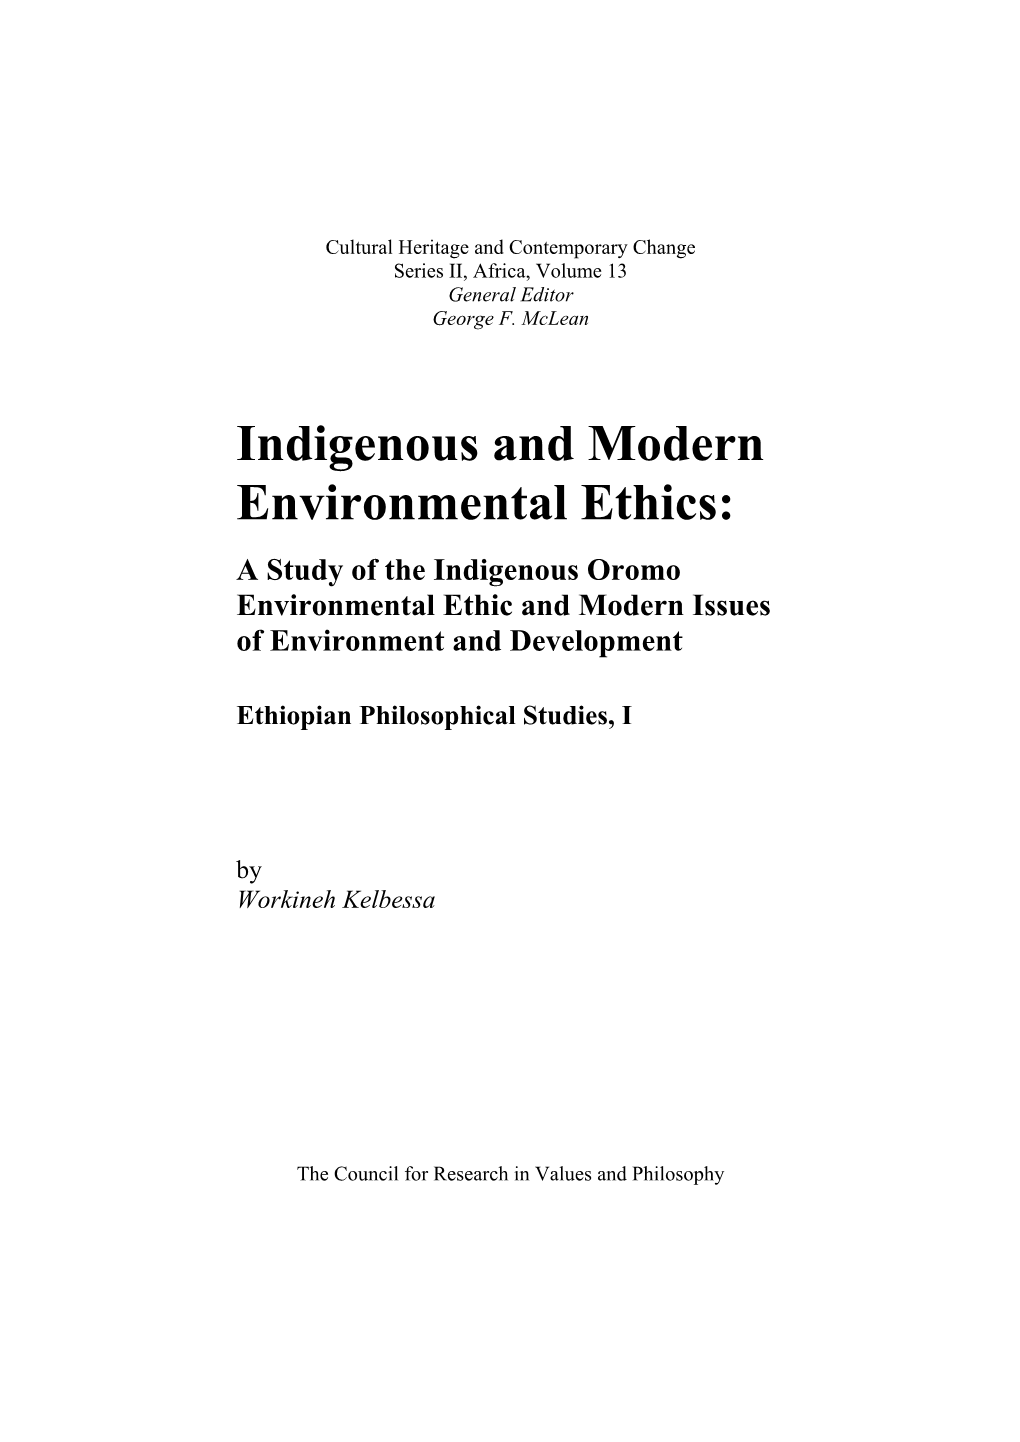 Indigenous and Modern Environmental Ethics